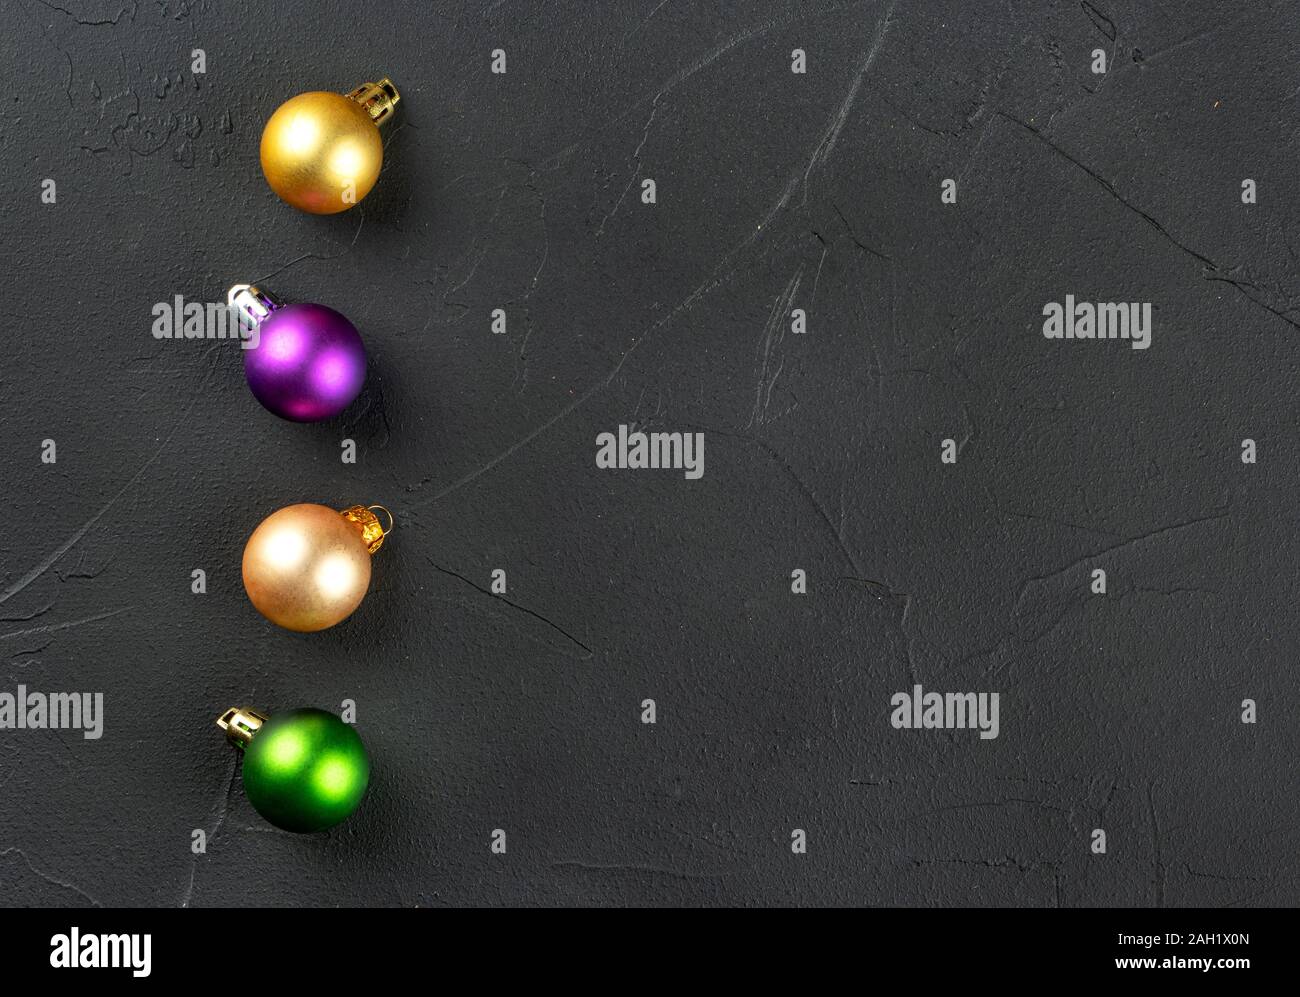 Four colorful Christmas balls on an empty concrete background Stock Photo